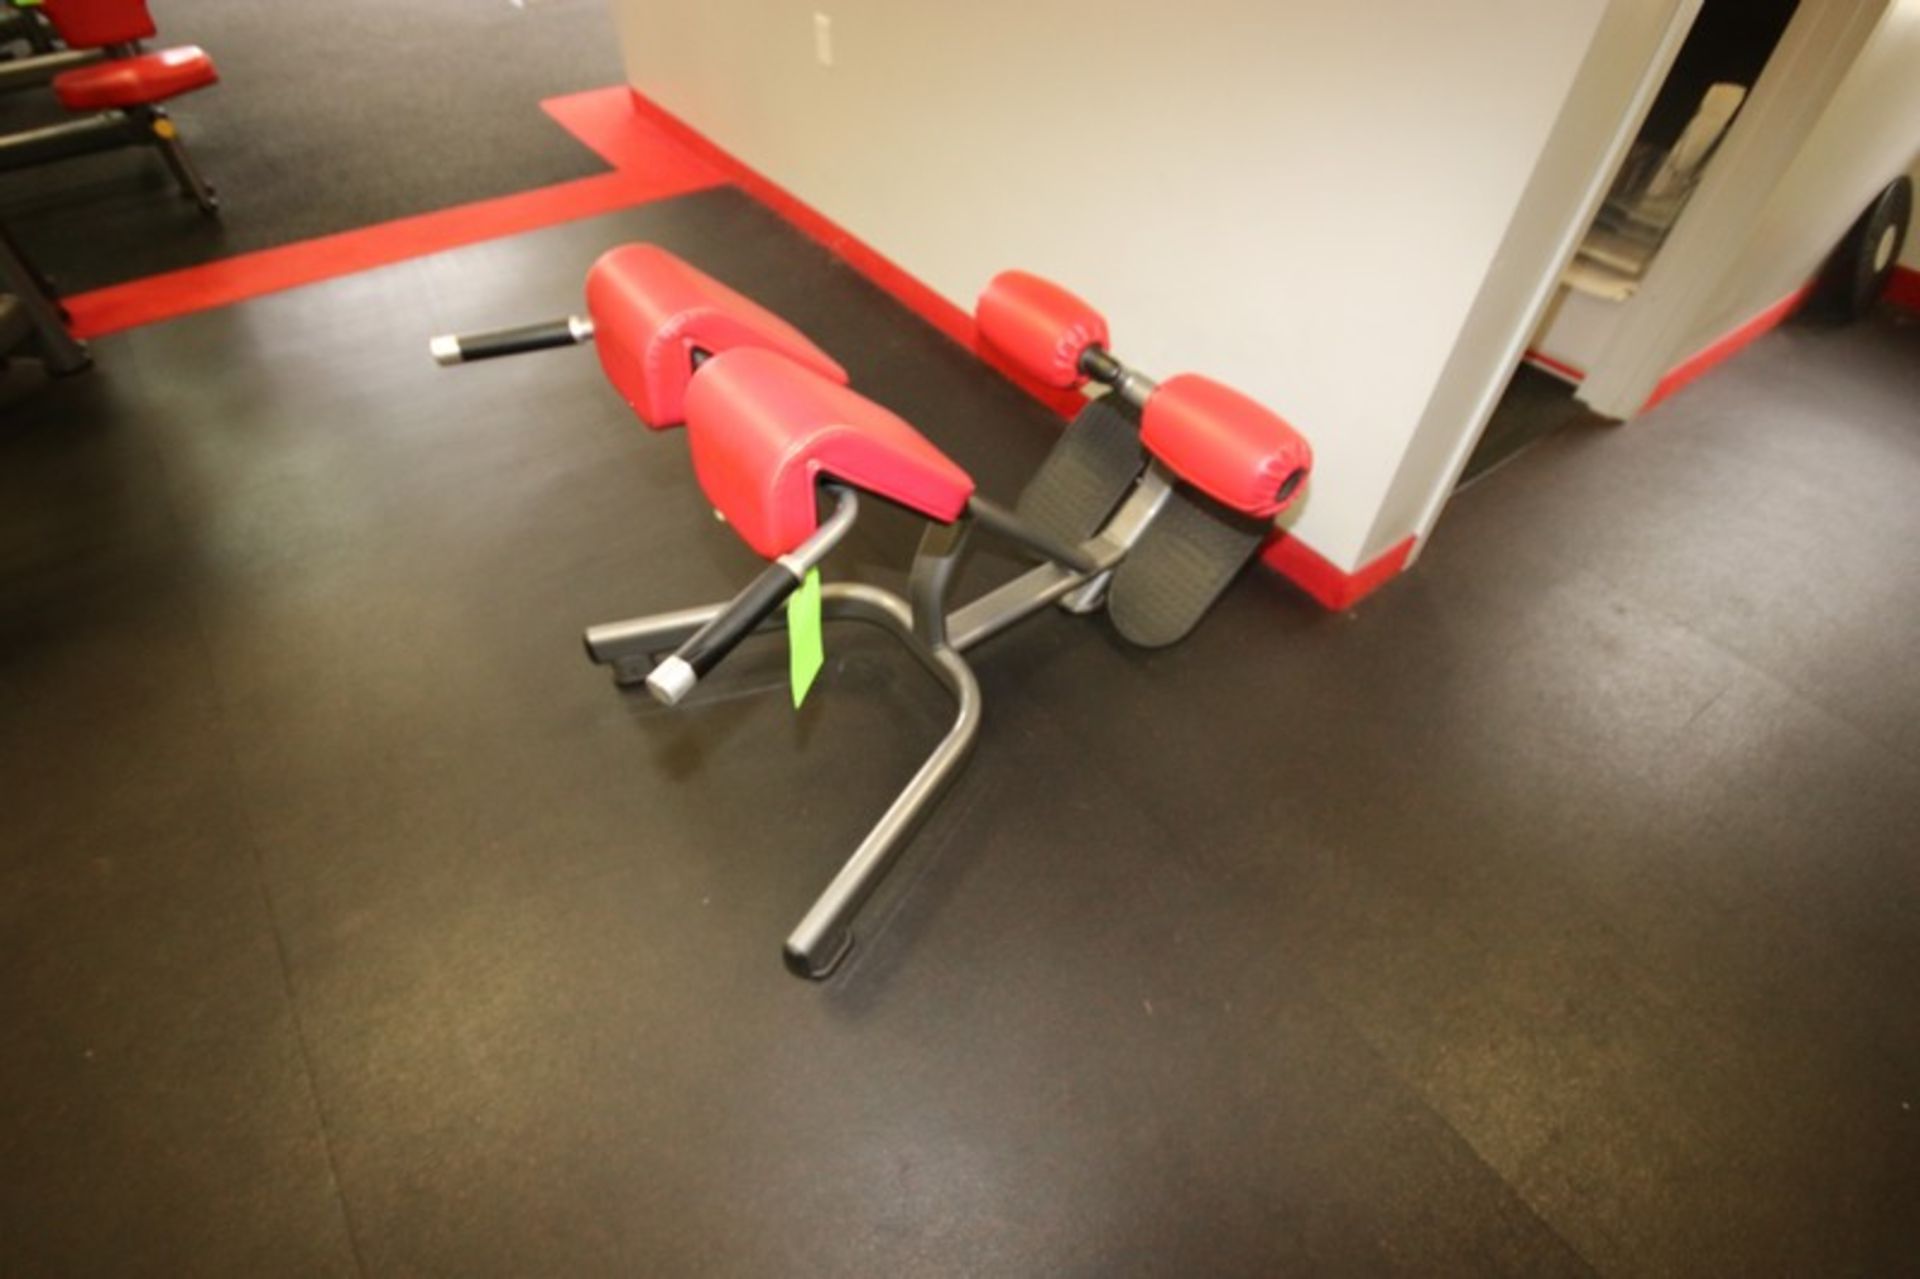 Matrix Glute Curl Station, Overall Dims.: Aprox. 42" L x 31" W x 33" H (LOCATED @ 2800 GOLDEN MILE - Image 2 of 3